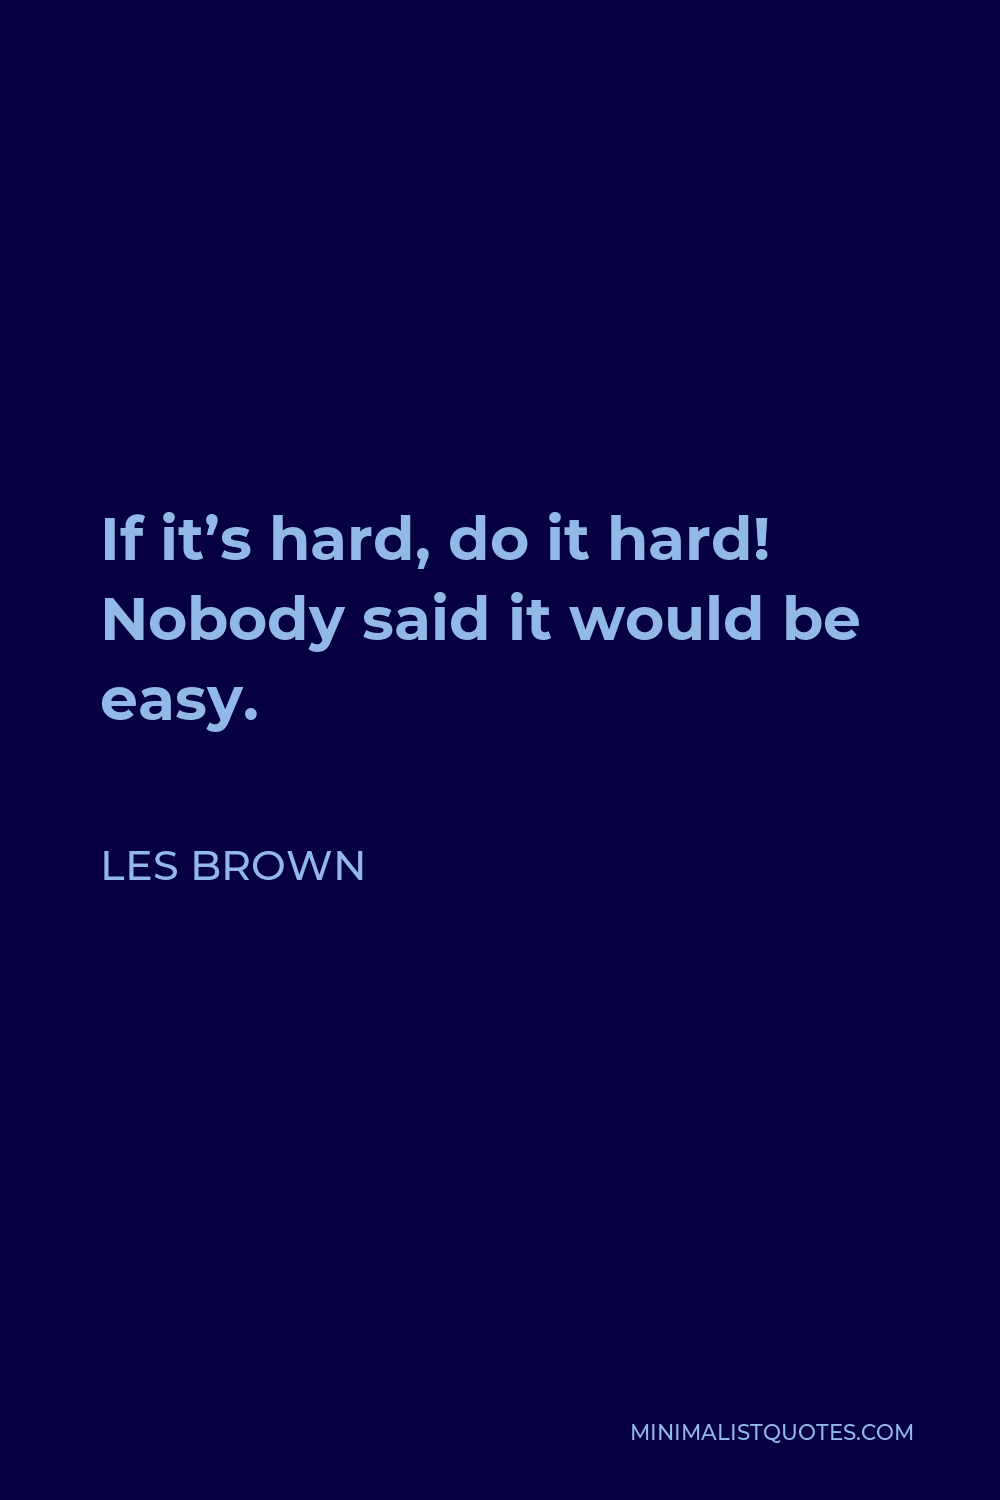 Les Brown Quote - If it’s hard, do it hard! Nobody said it would be easy.